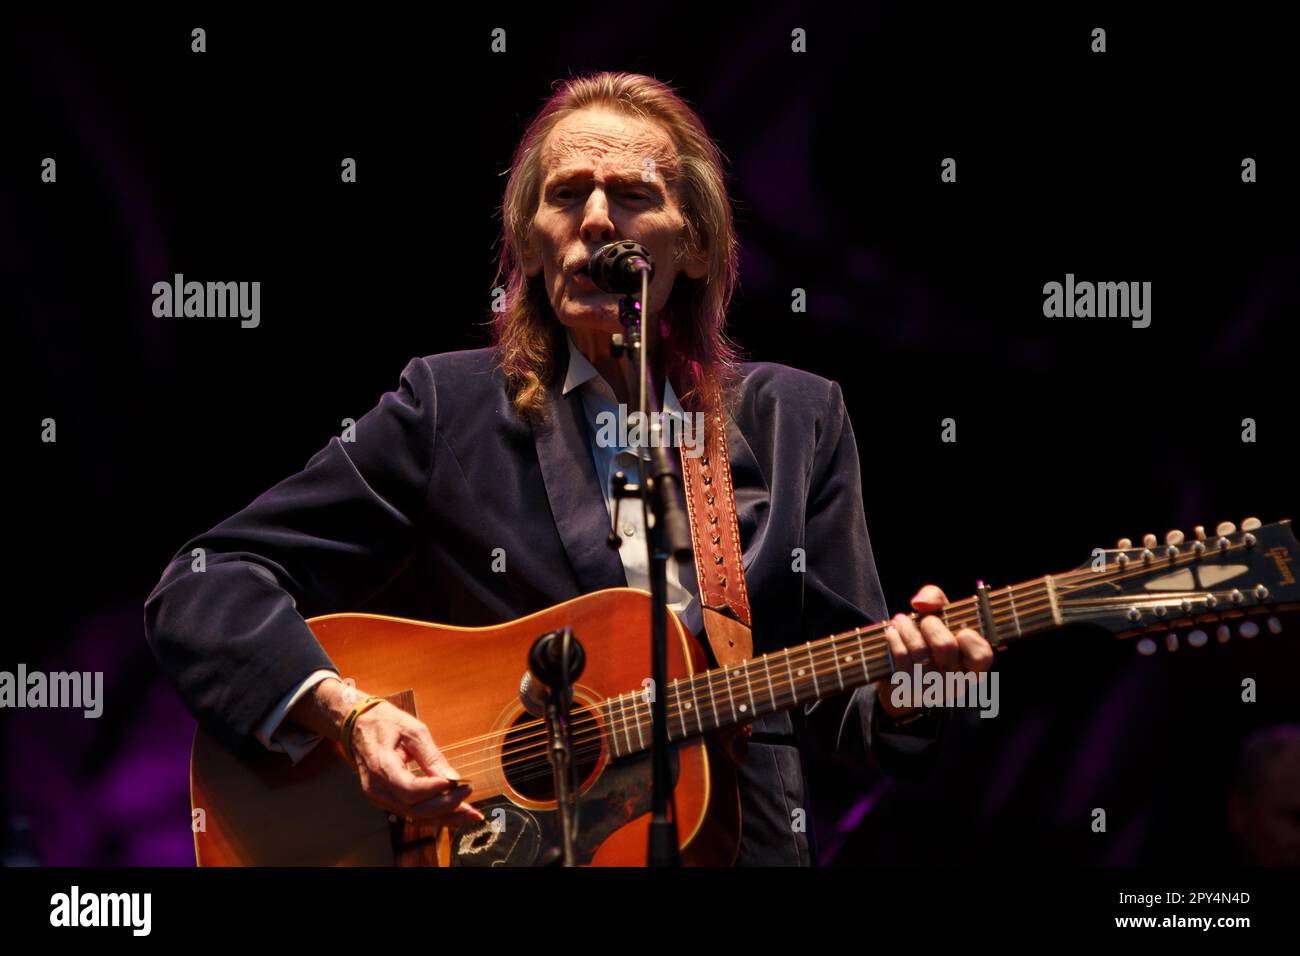 Gordon Lightfoot performs on stage with an acoustic guitar on an outdoor stage at the Greenbelt Harvest Picnic in 2015 Stock Photo